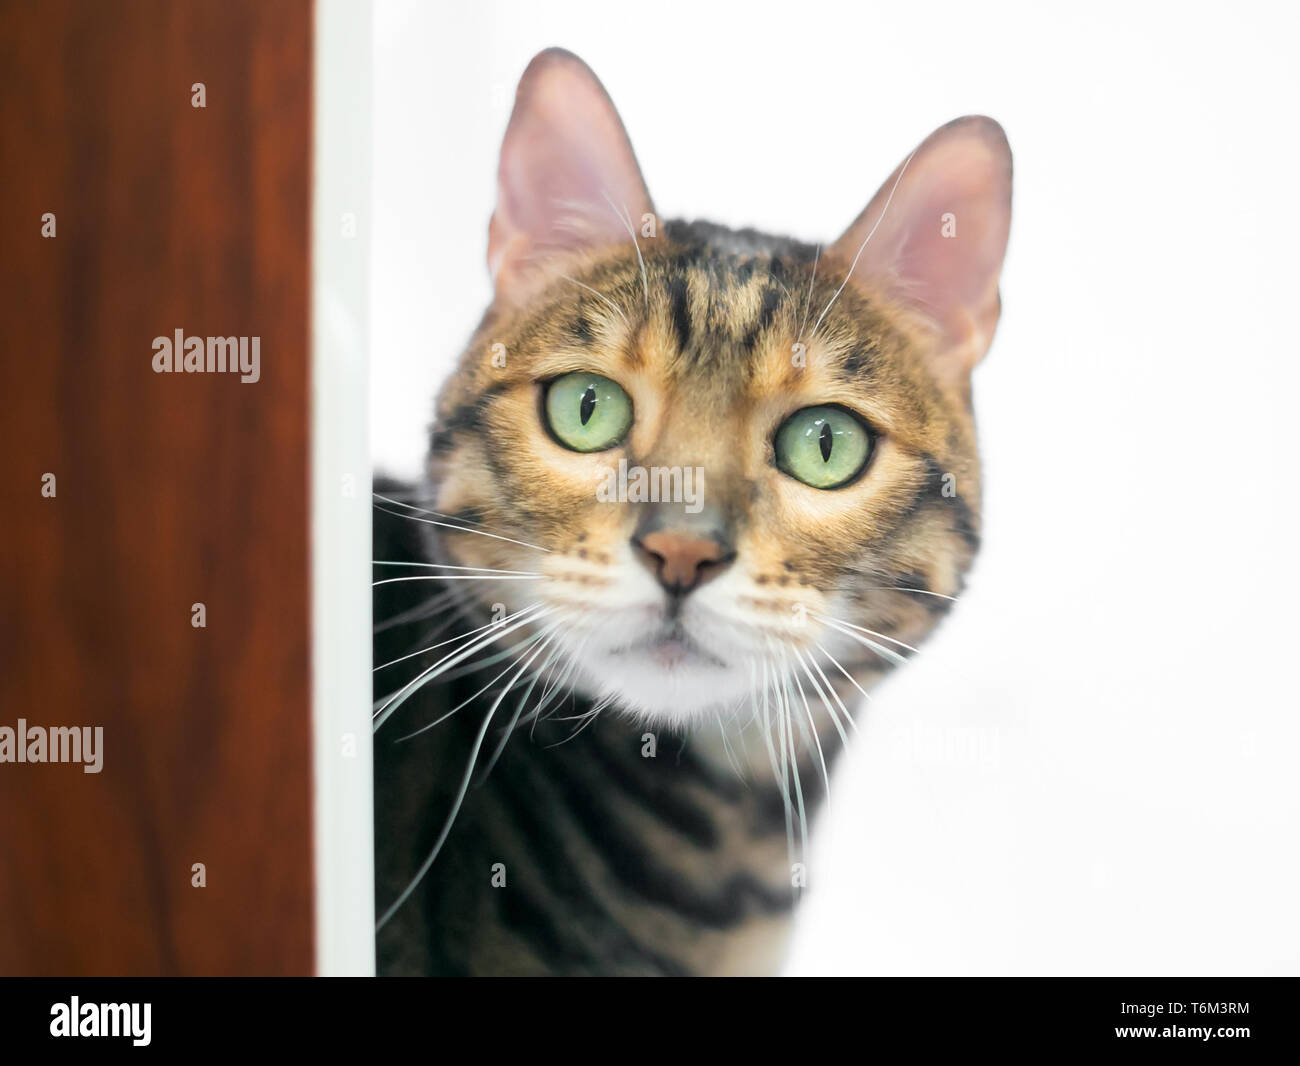 A Bengal breed cat with bright green eyes peeking around a doorway Stock Photo